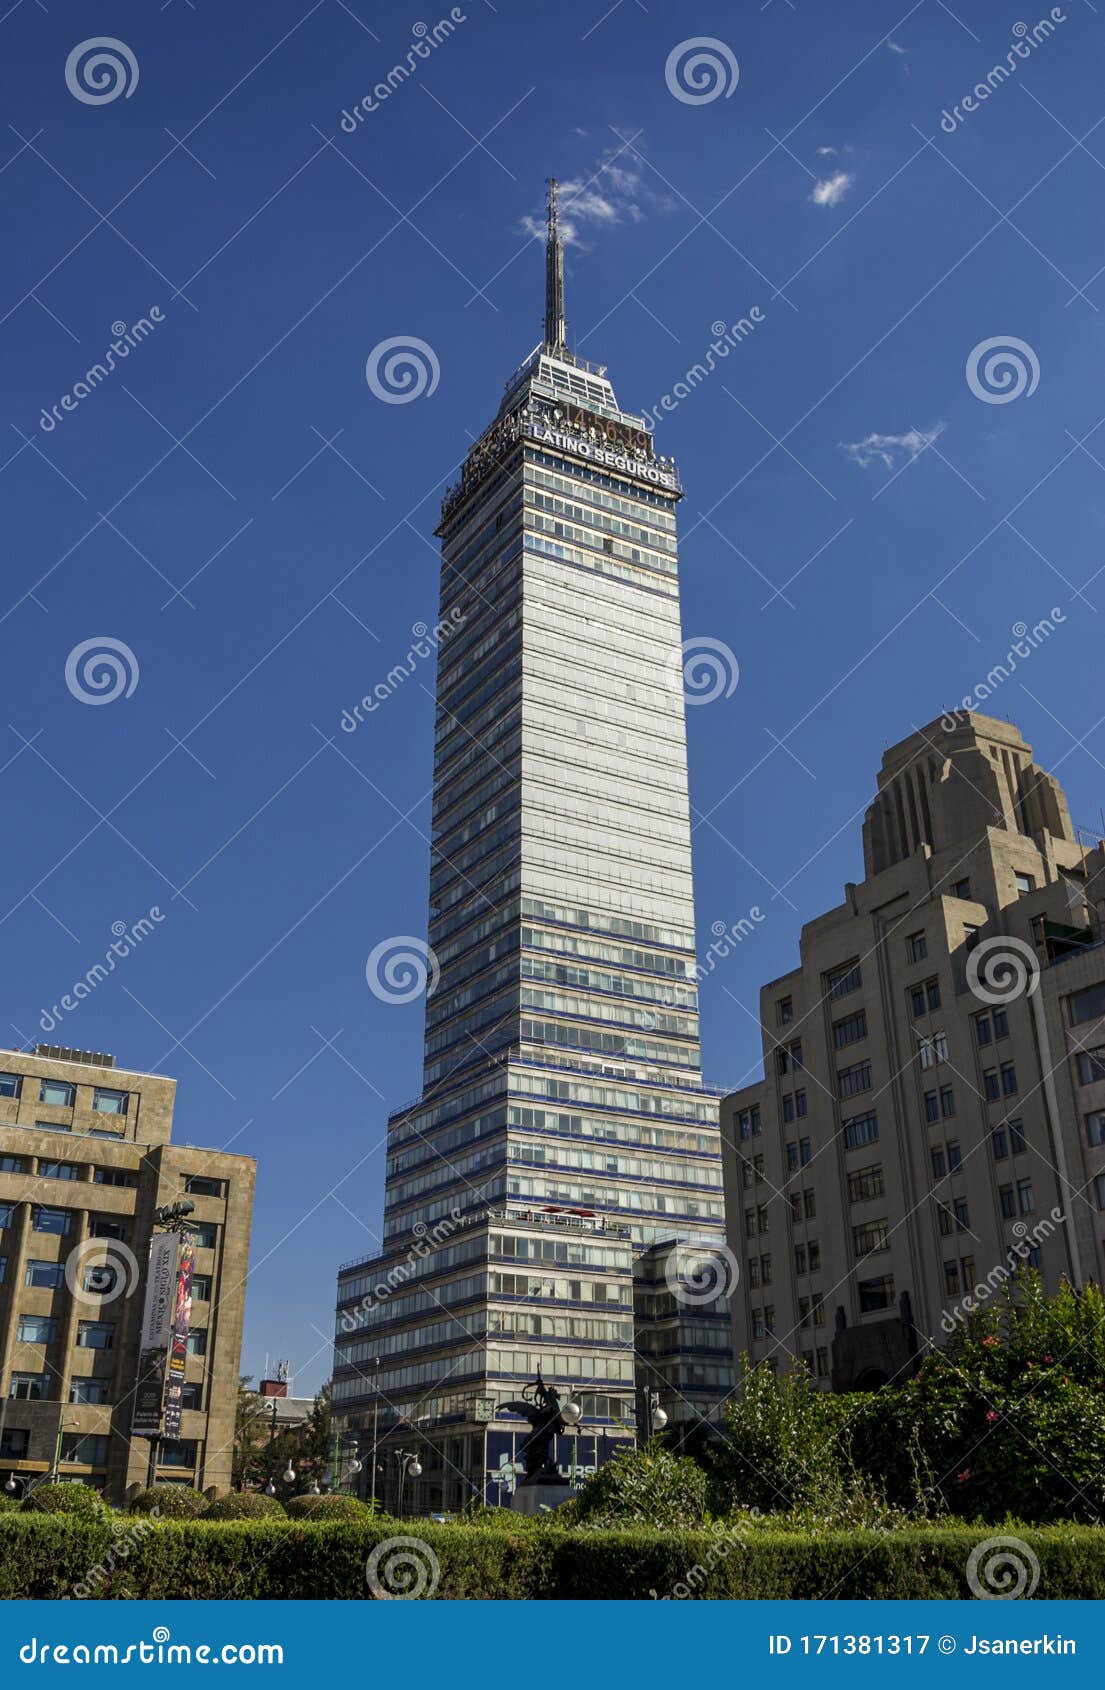 torre latinoamericano or the latin american tower in mexico city